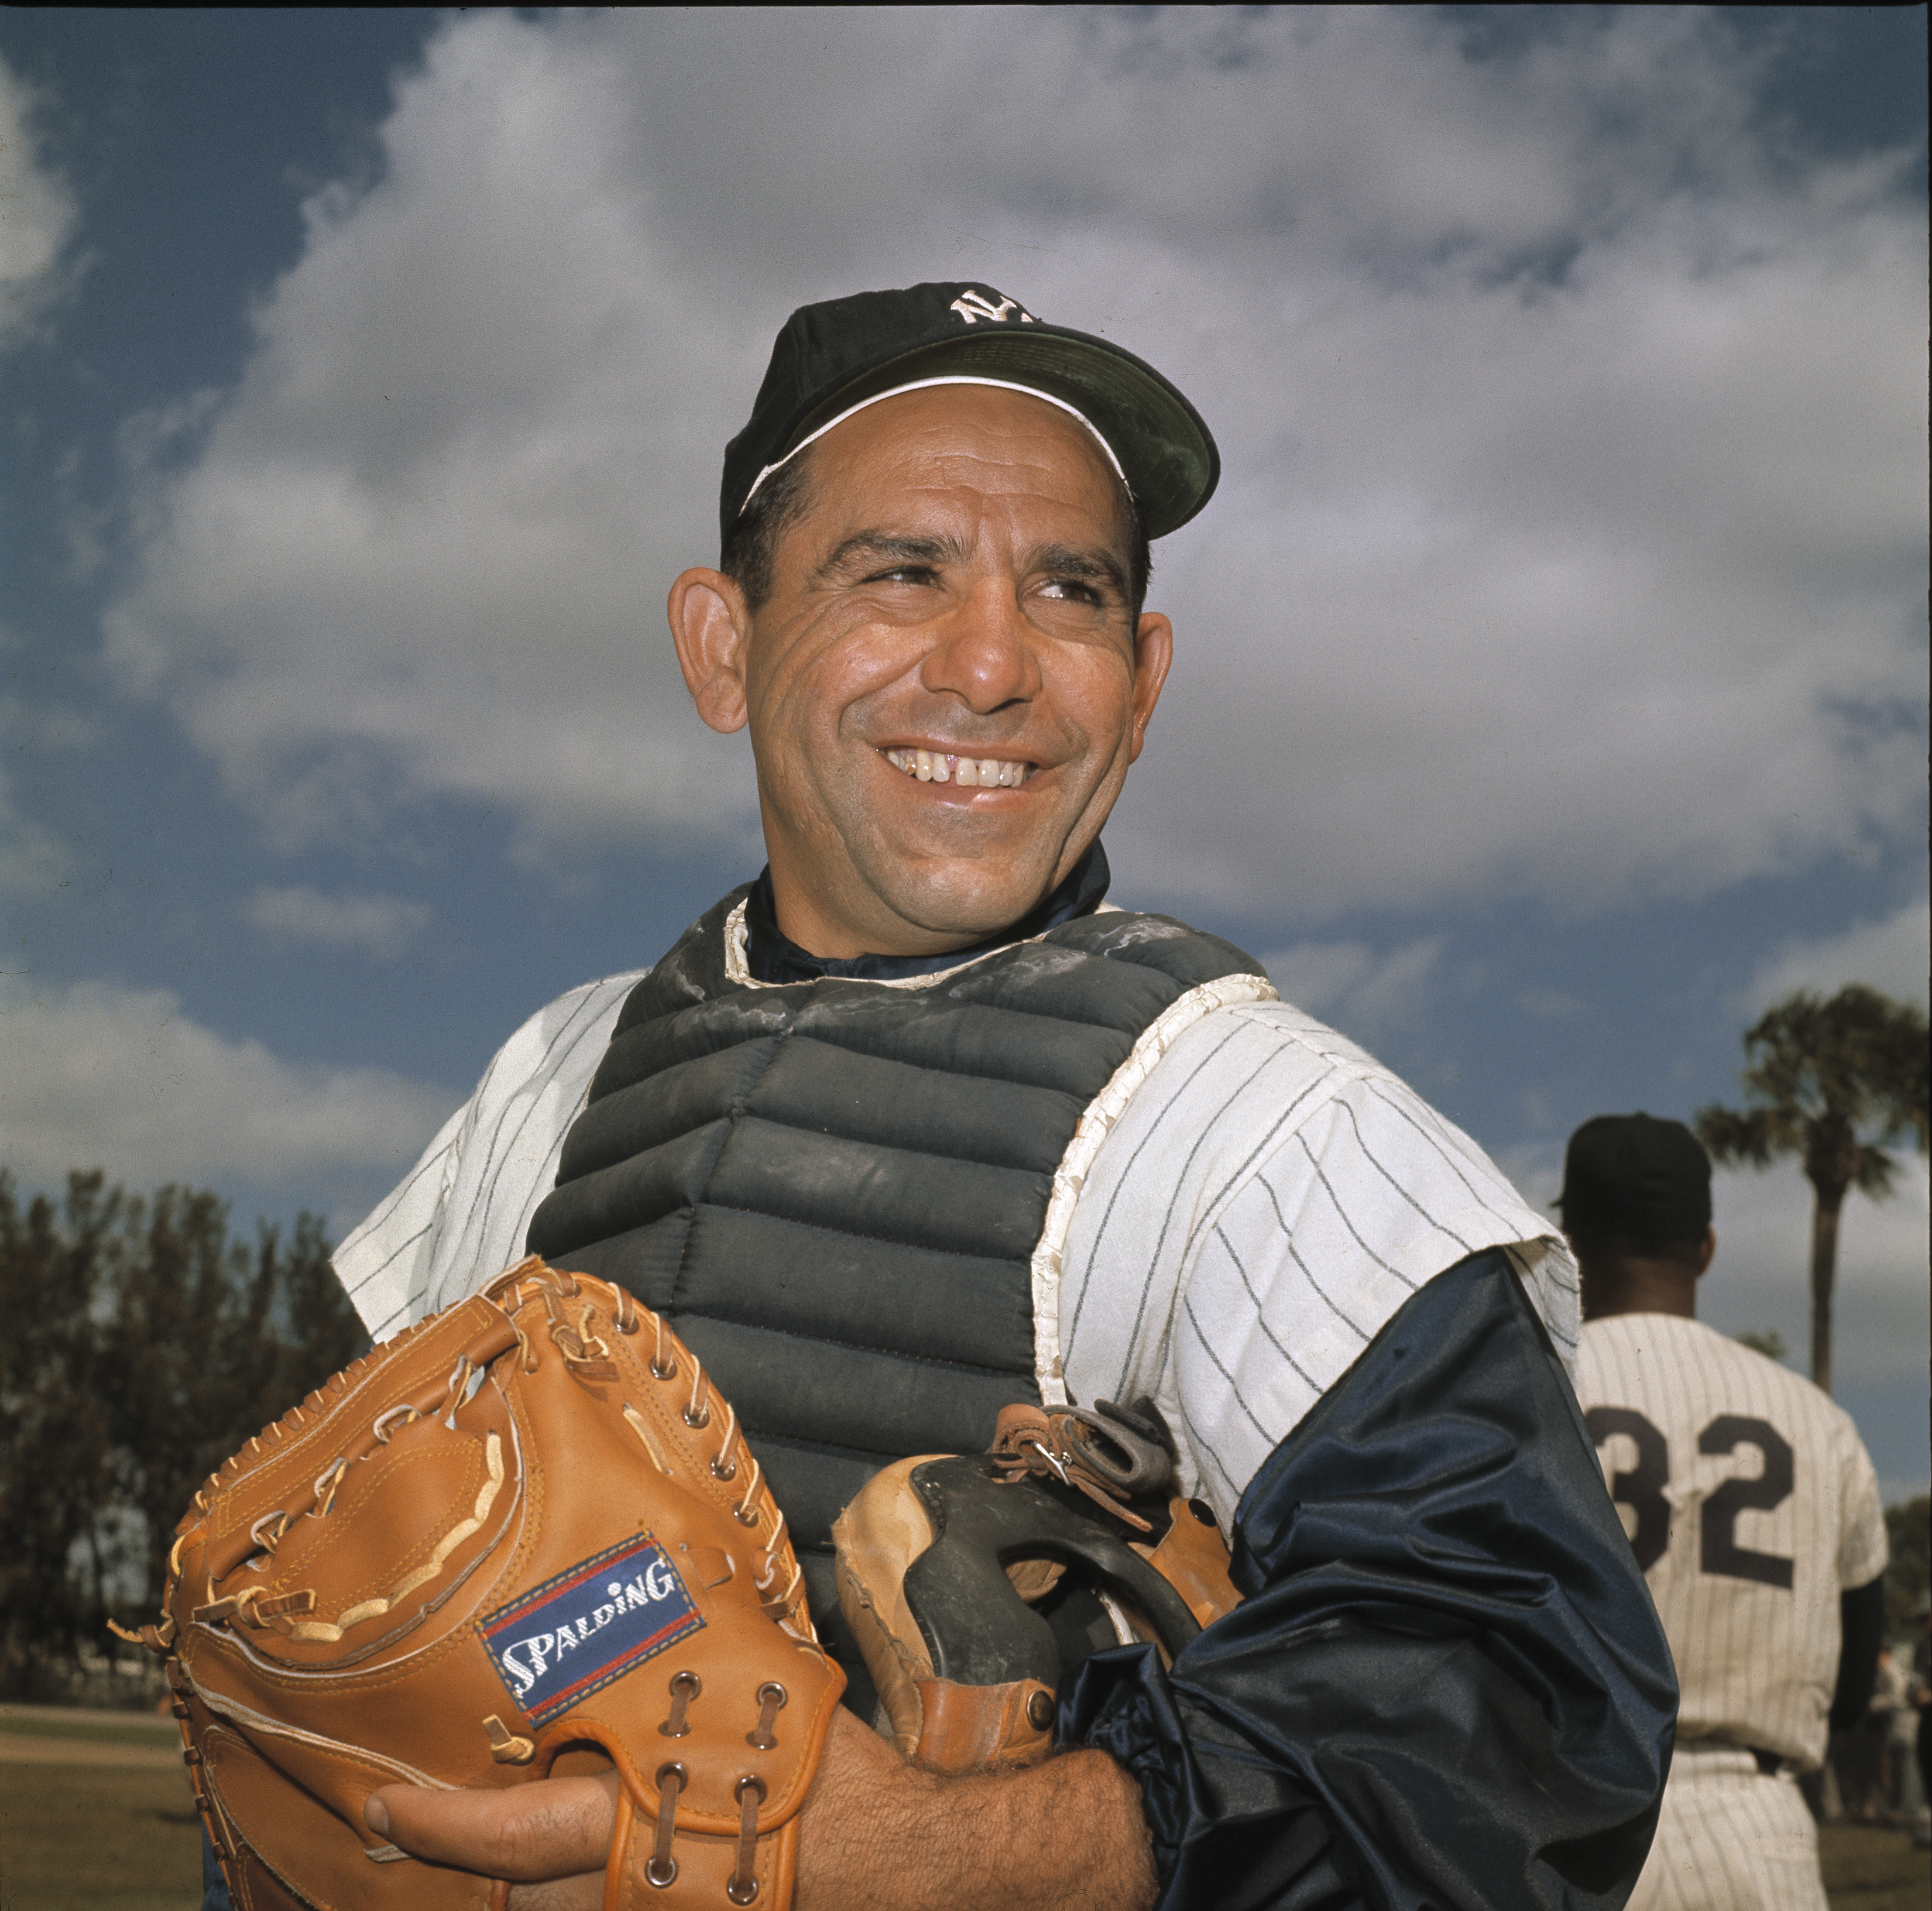 File-New York Yankee catcher Yogi Berra poses at spring training in Florida, in an undated file photo. Berra, the Yankees Hall of Fame catcher has died. He was 90. (AP Photo/File)